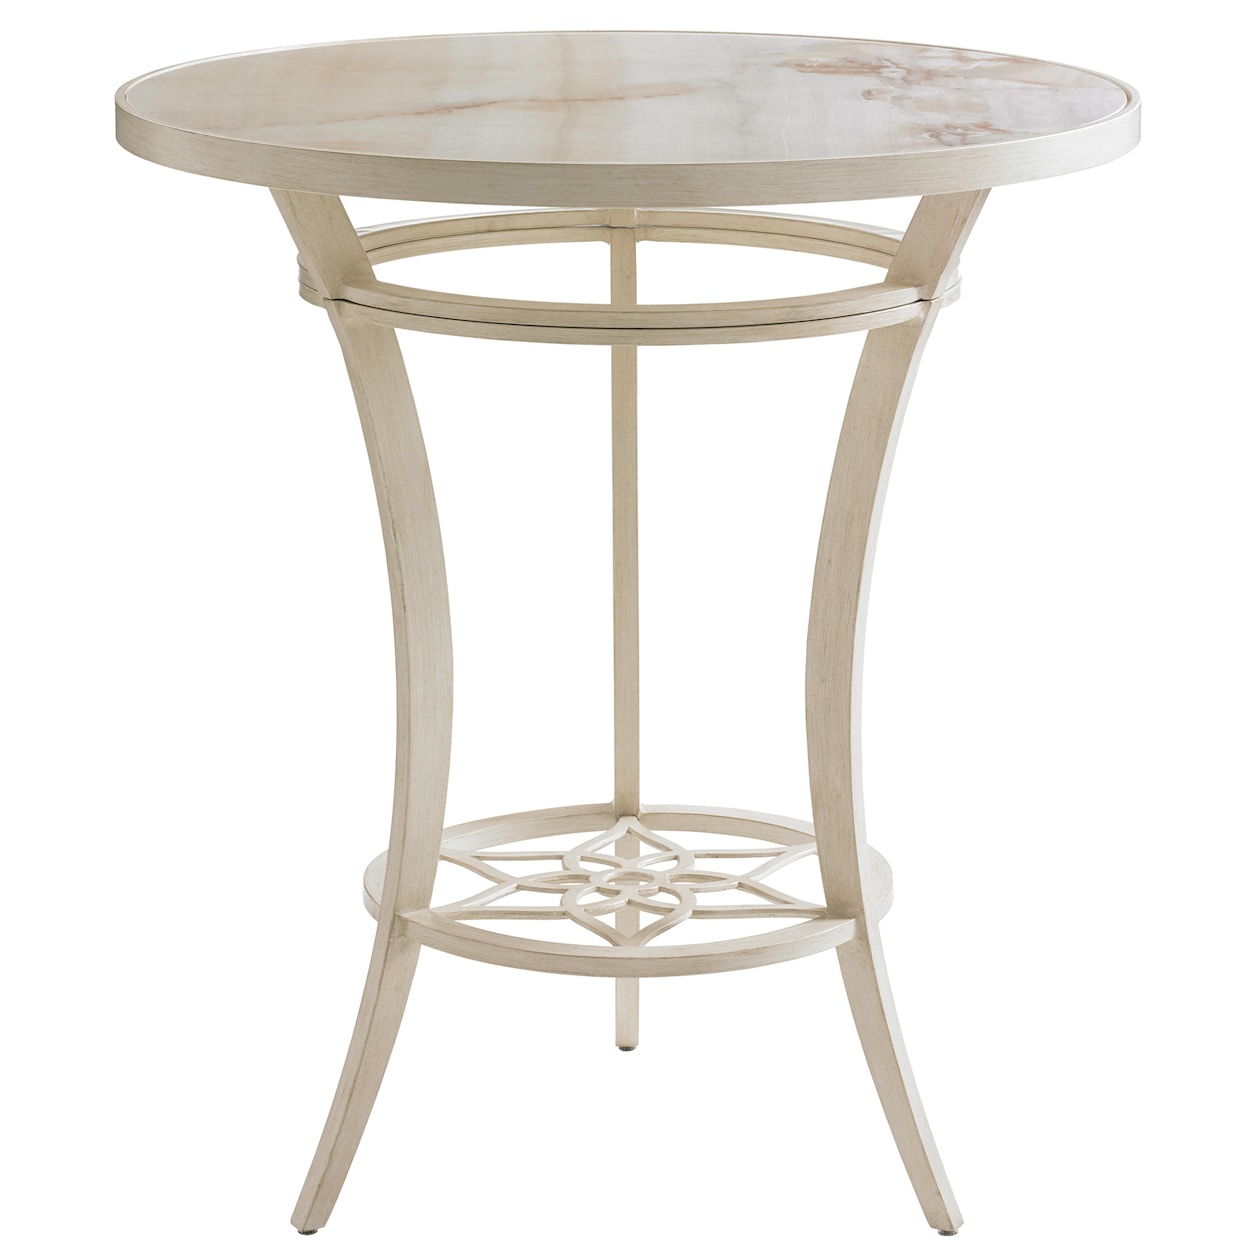 Tommy Bahama Outdoor Living Misty Garden High/Low Bistro Table